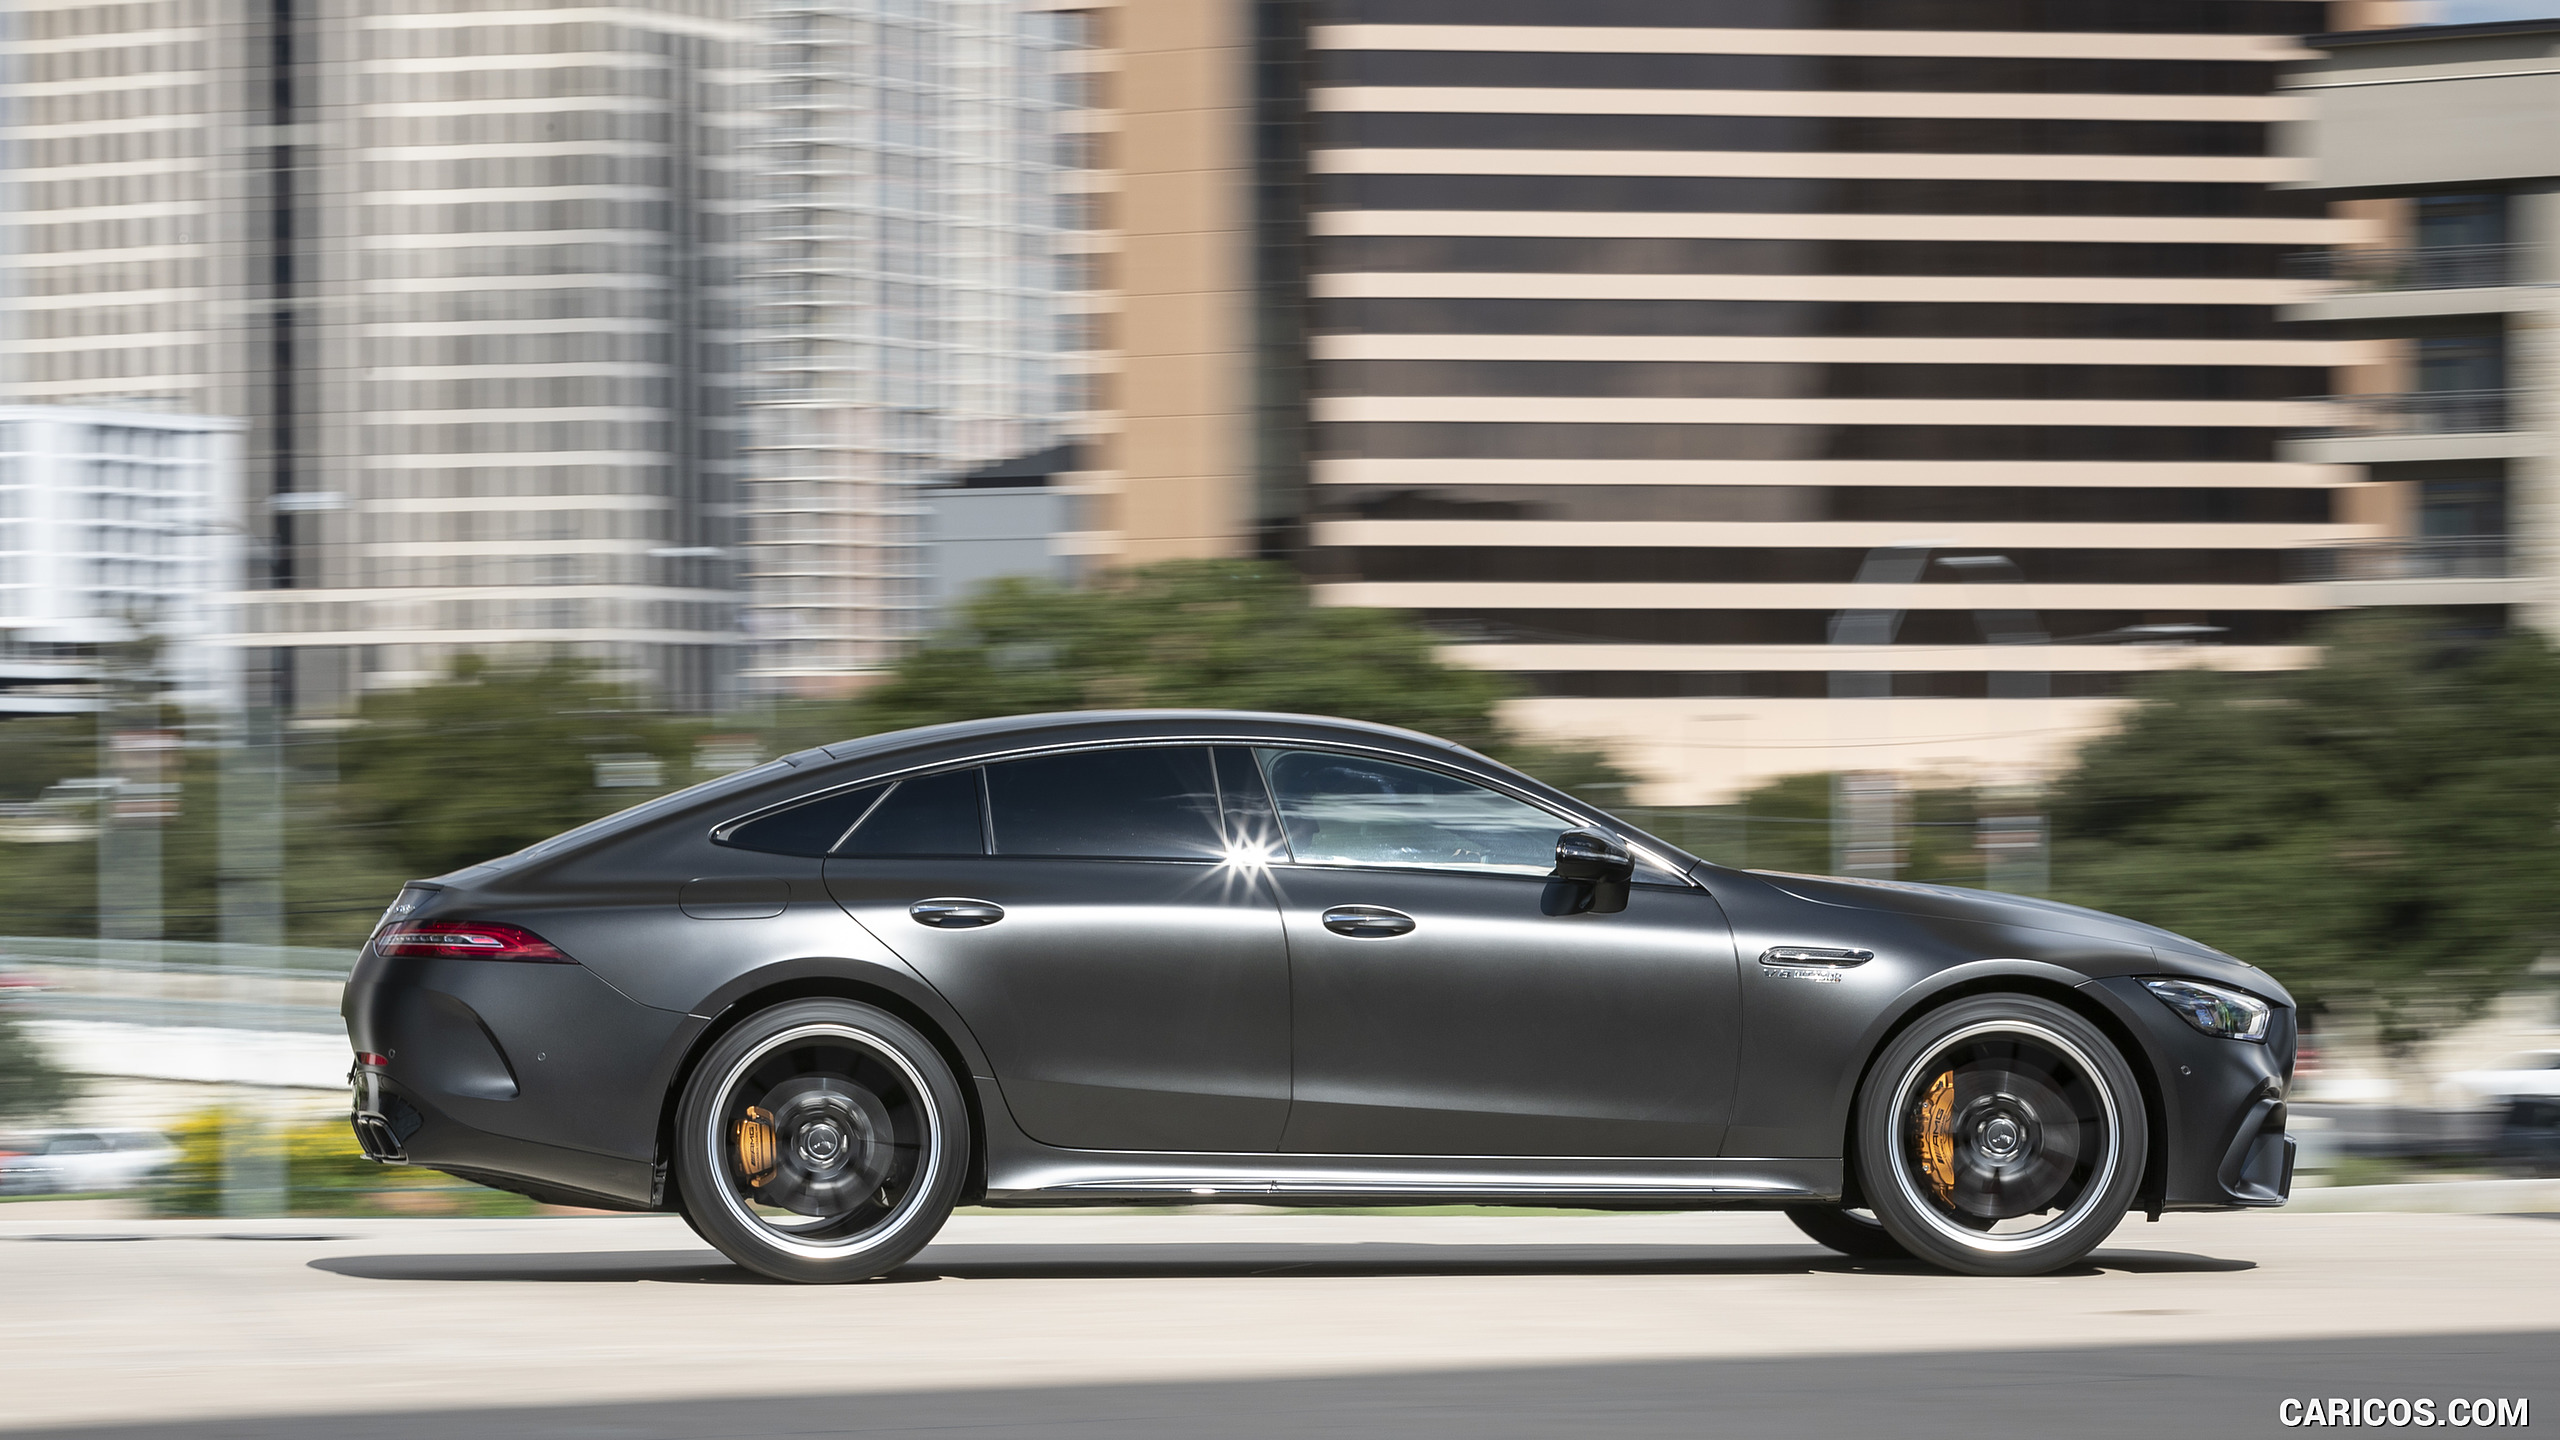 2019 Mercedes-AMG GT 63 S 4MATIC+ 4-Door Coupe - Side, #201 of 427